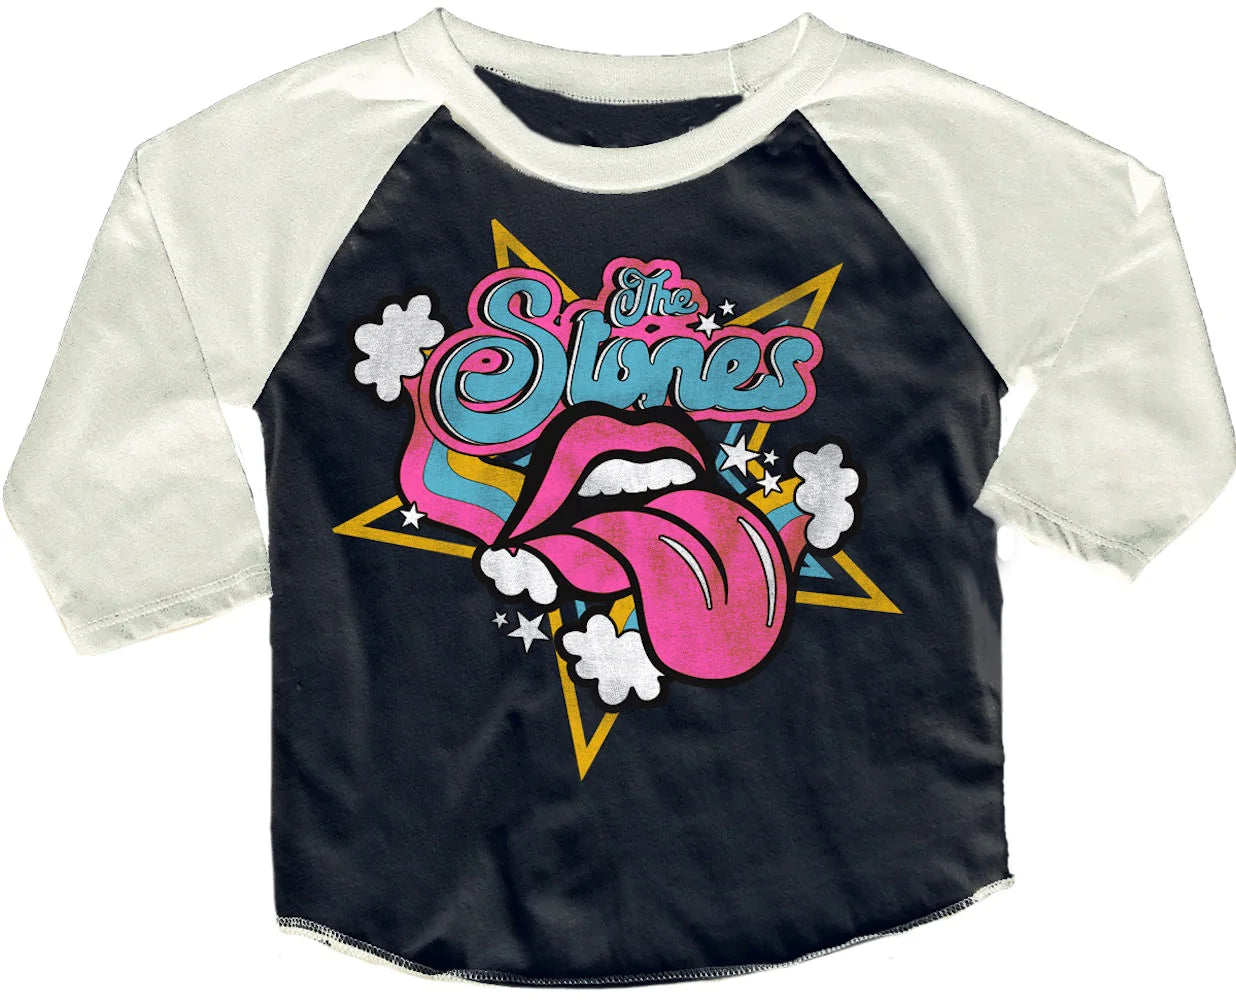 Rowdy Sprout Rolling Stones Raglan Tee